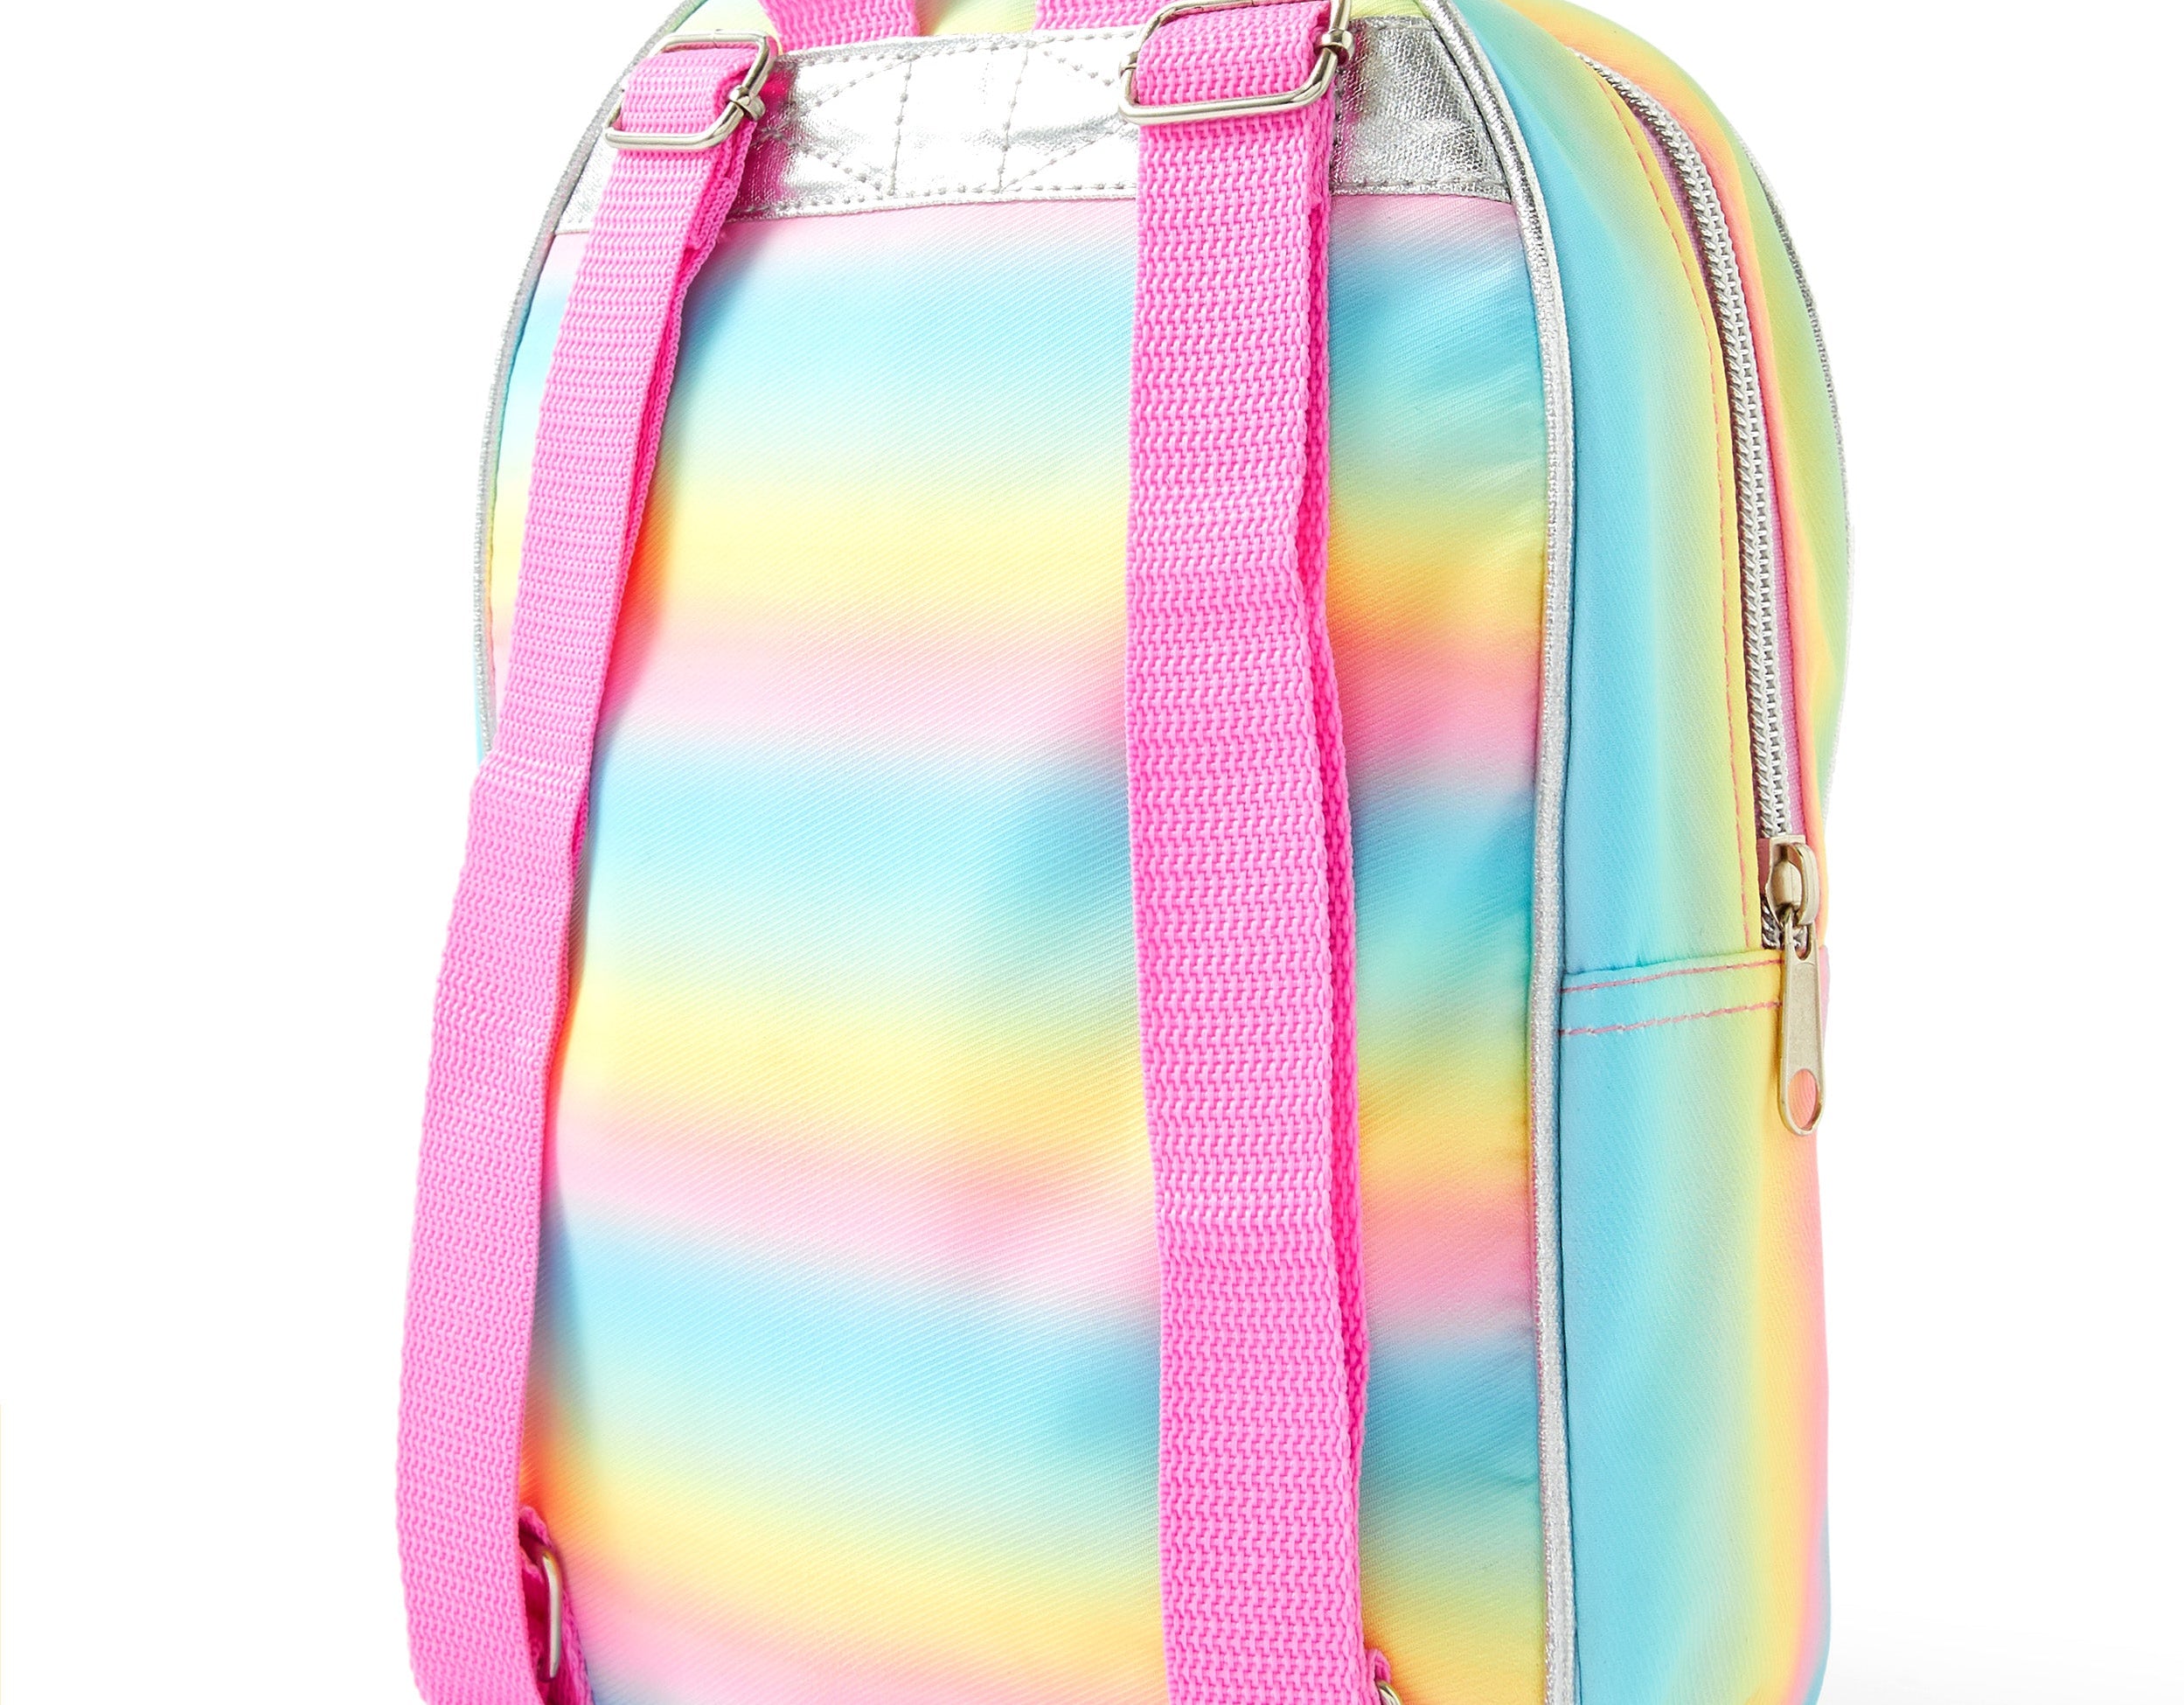 Accessorize London Ombre Badge Backpack